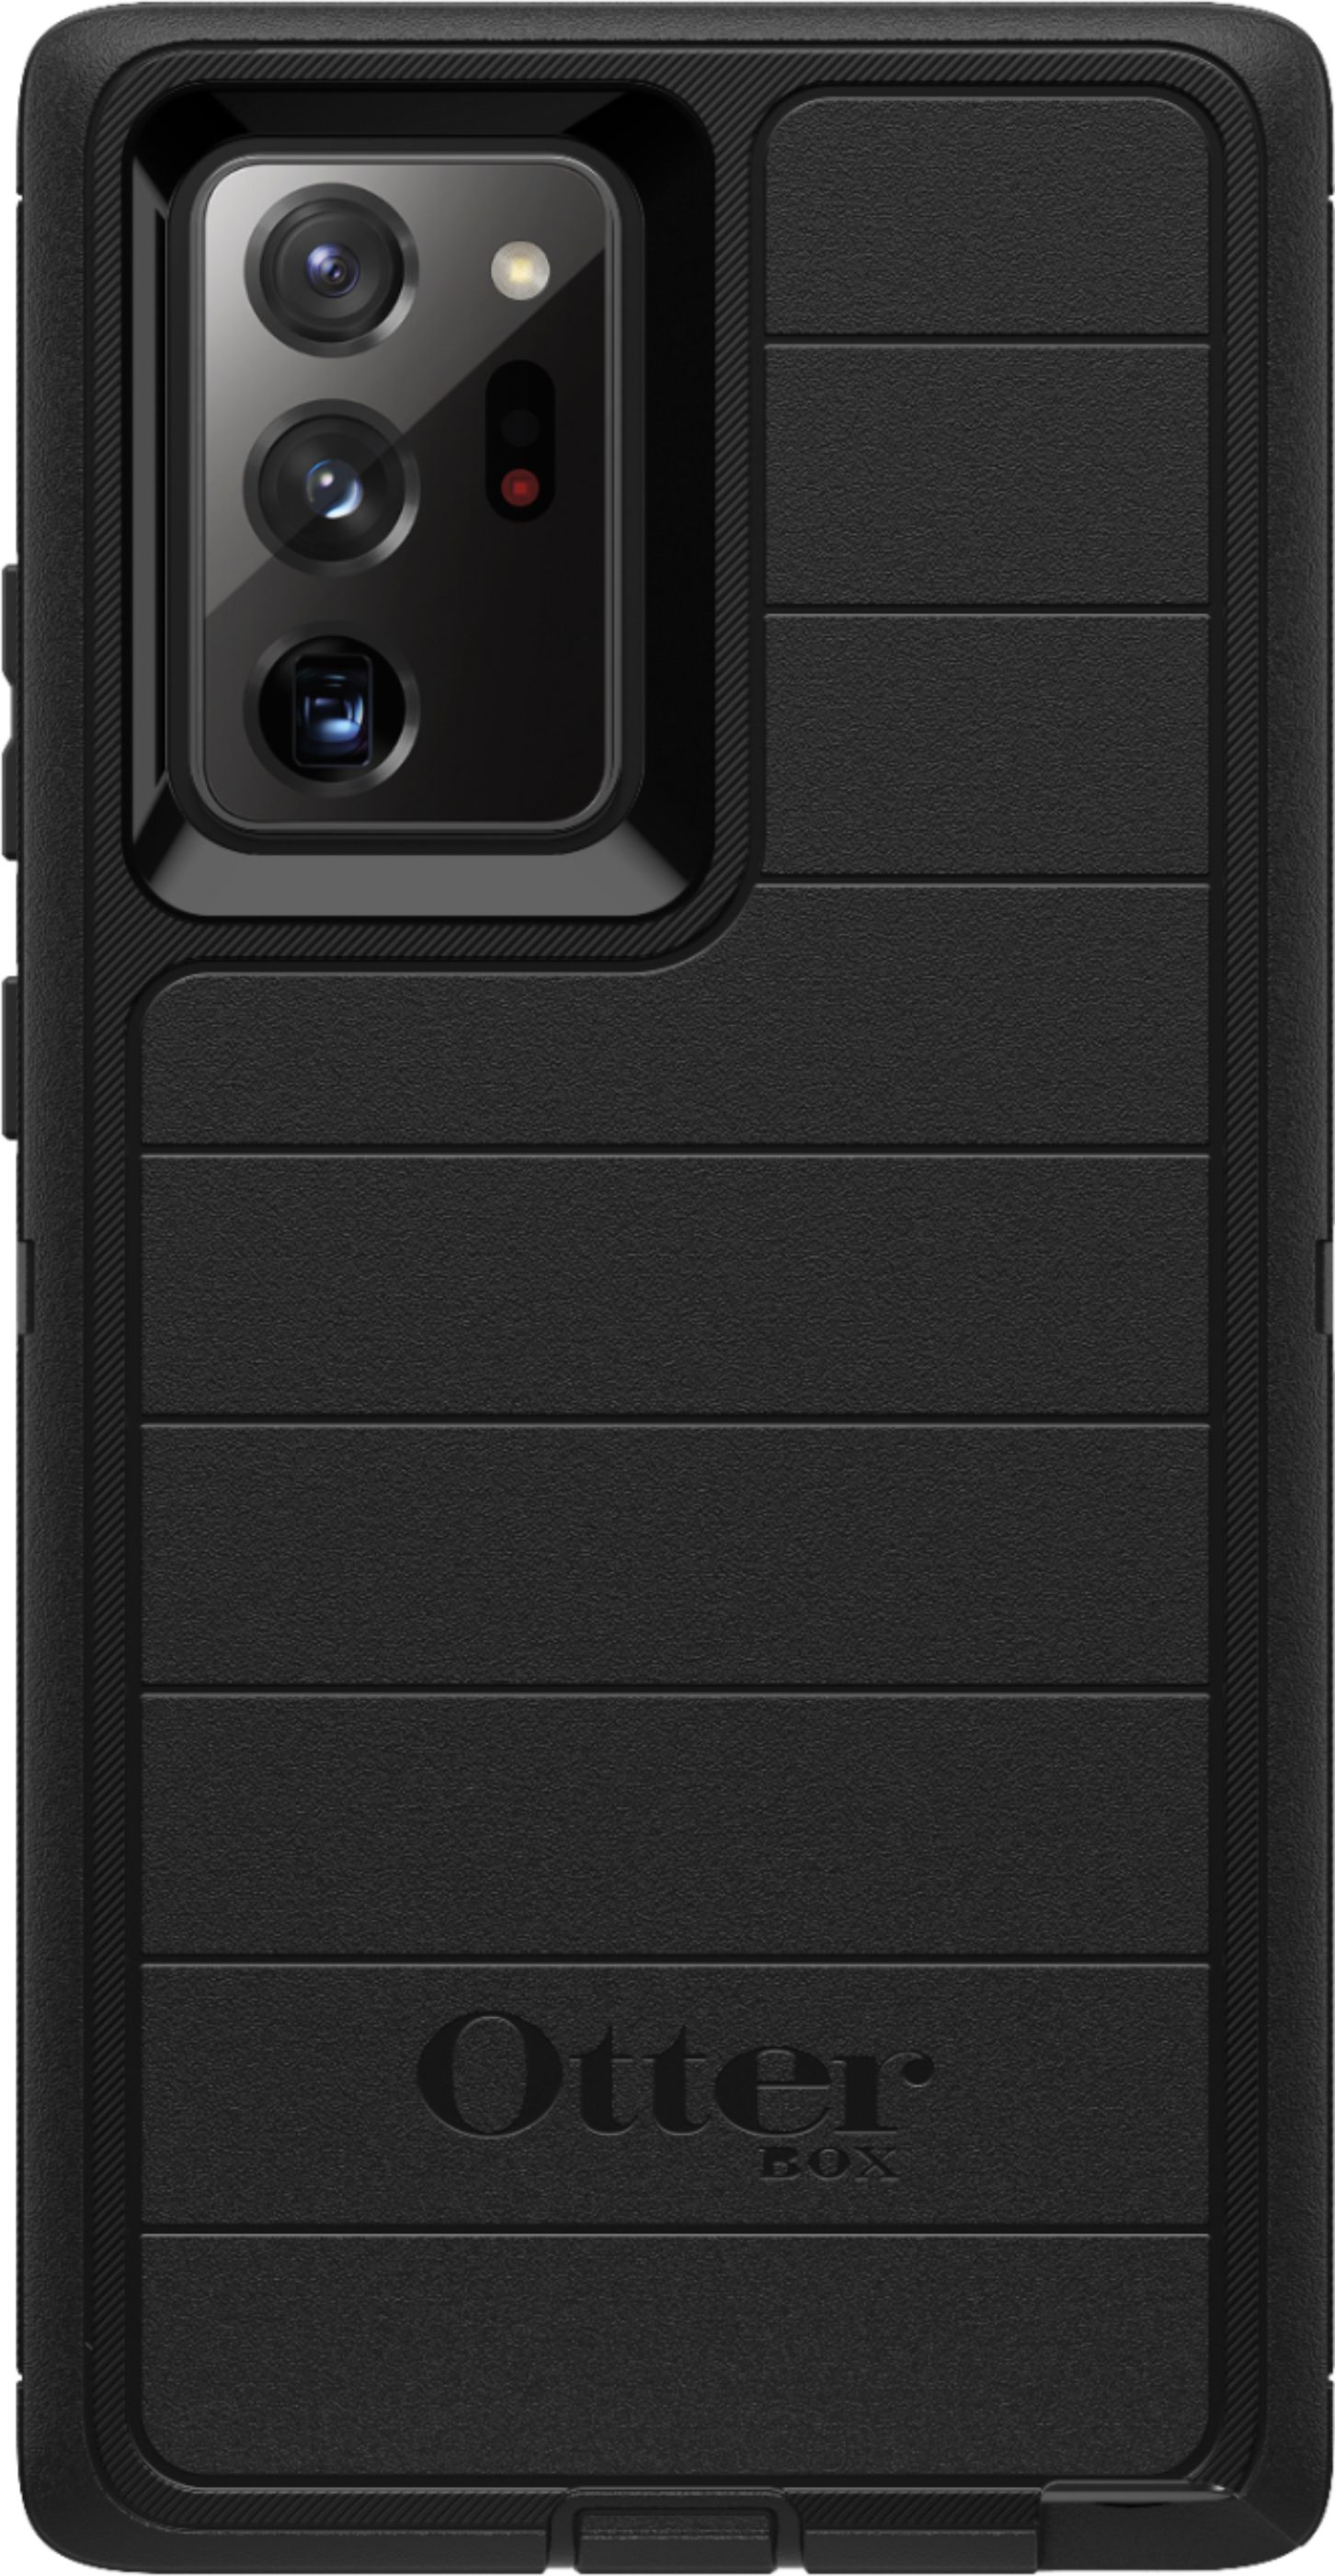 for Galaxy Note 20 Ultra 5G OtterBox Defender Series Replacement Belt Clip Holster ONLY Black ONLY